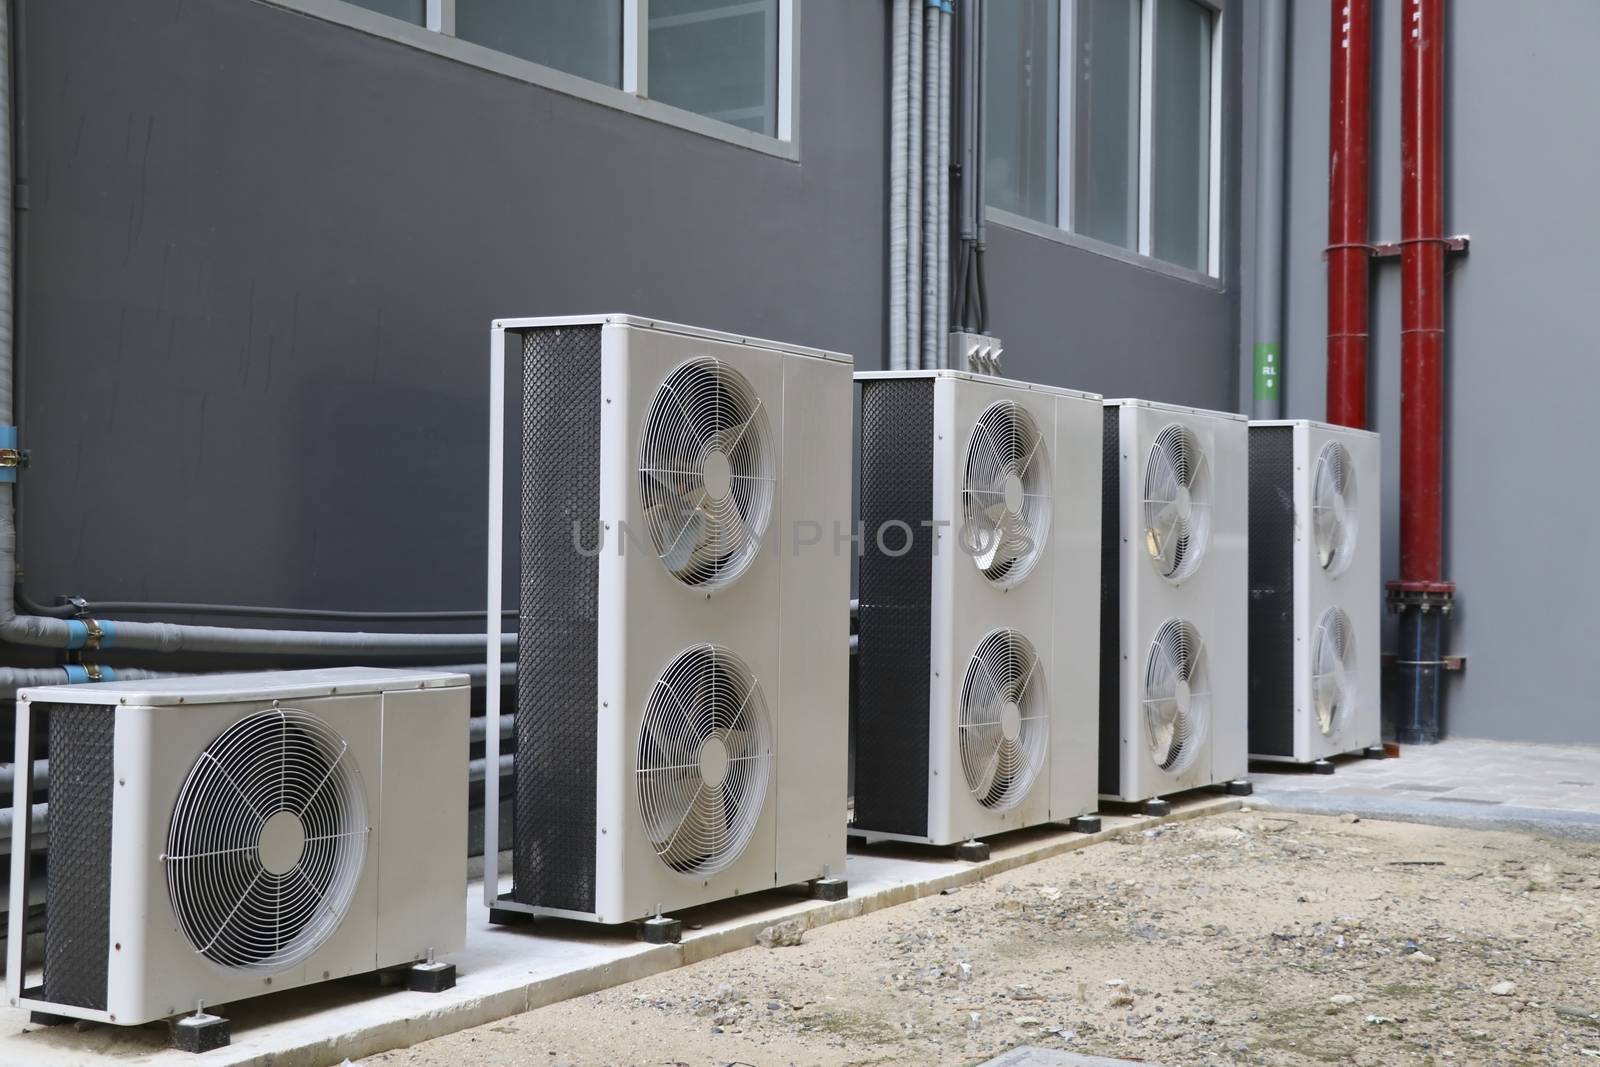 Condensing unit of air conditioning systems. Condensing unit installed in a row outside the building.